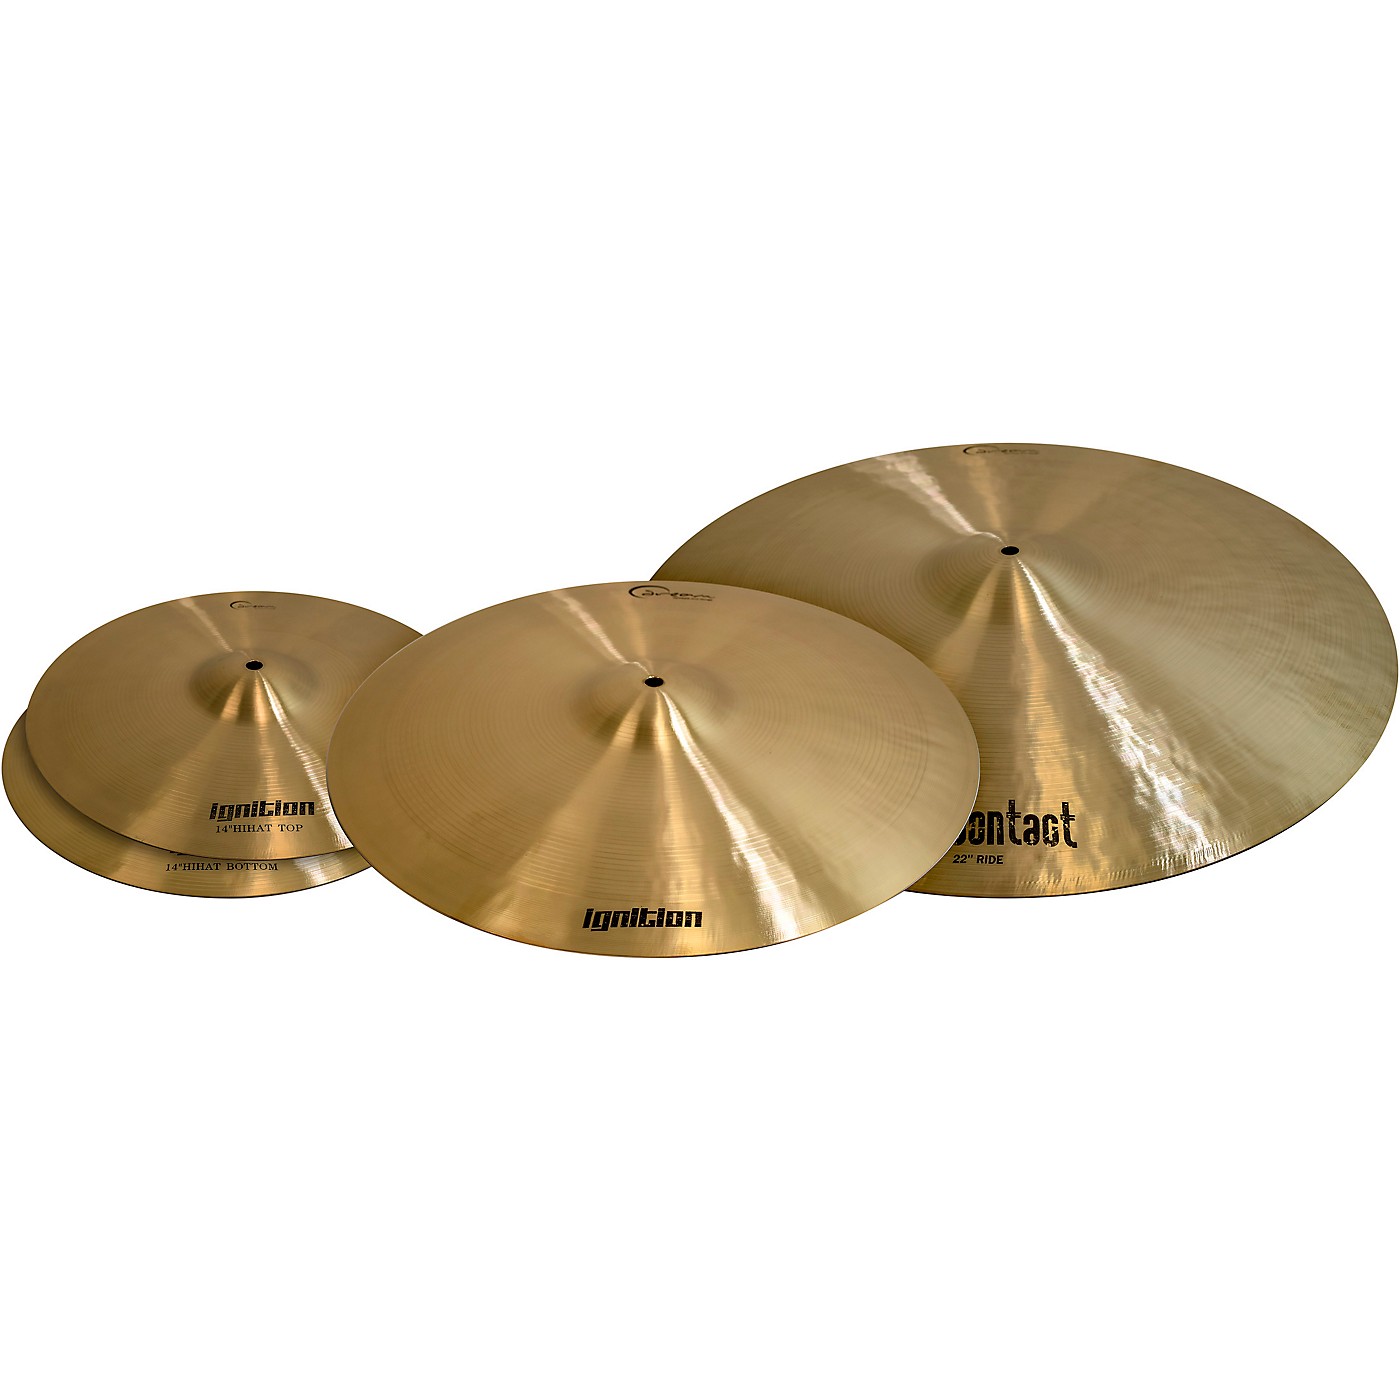 Dream Ignition 3-Piece Cymbal Pack, Large Sizes thumbnail